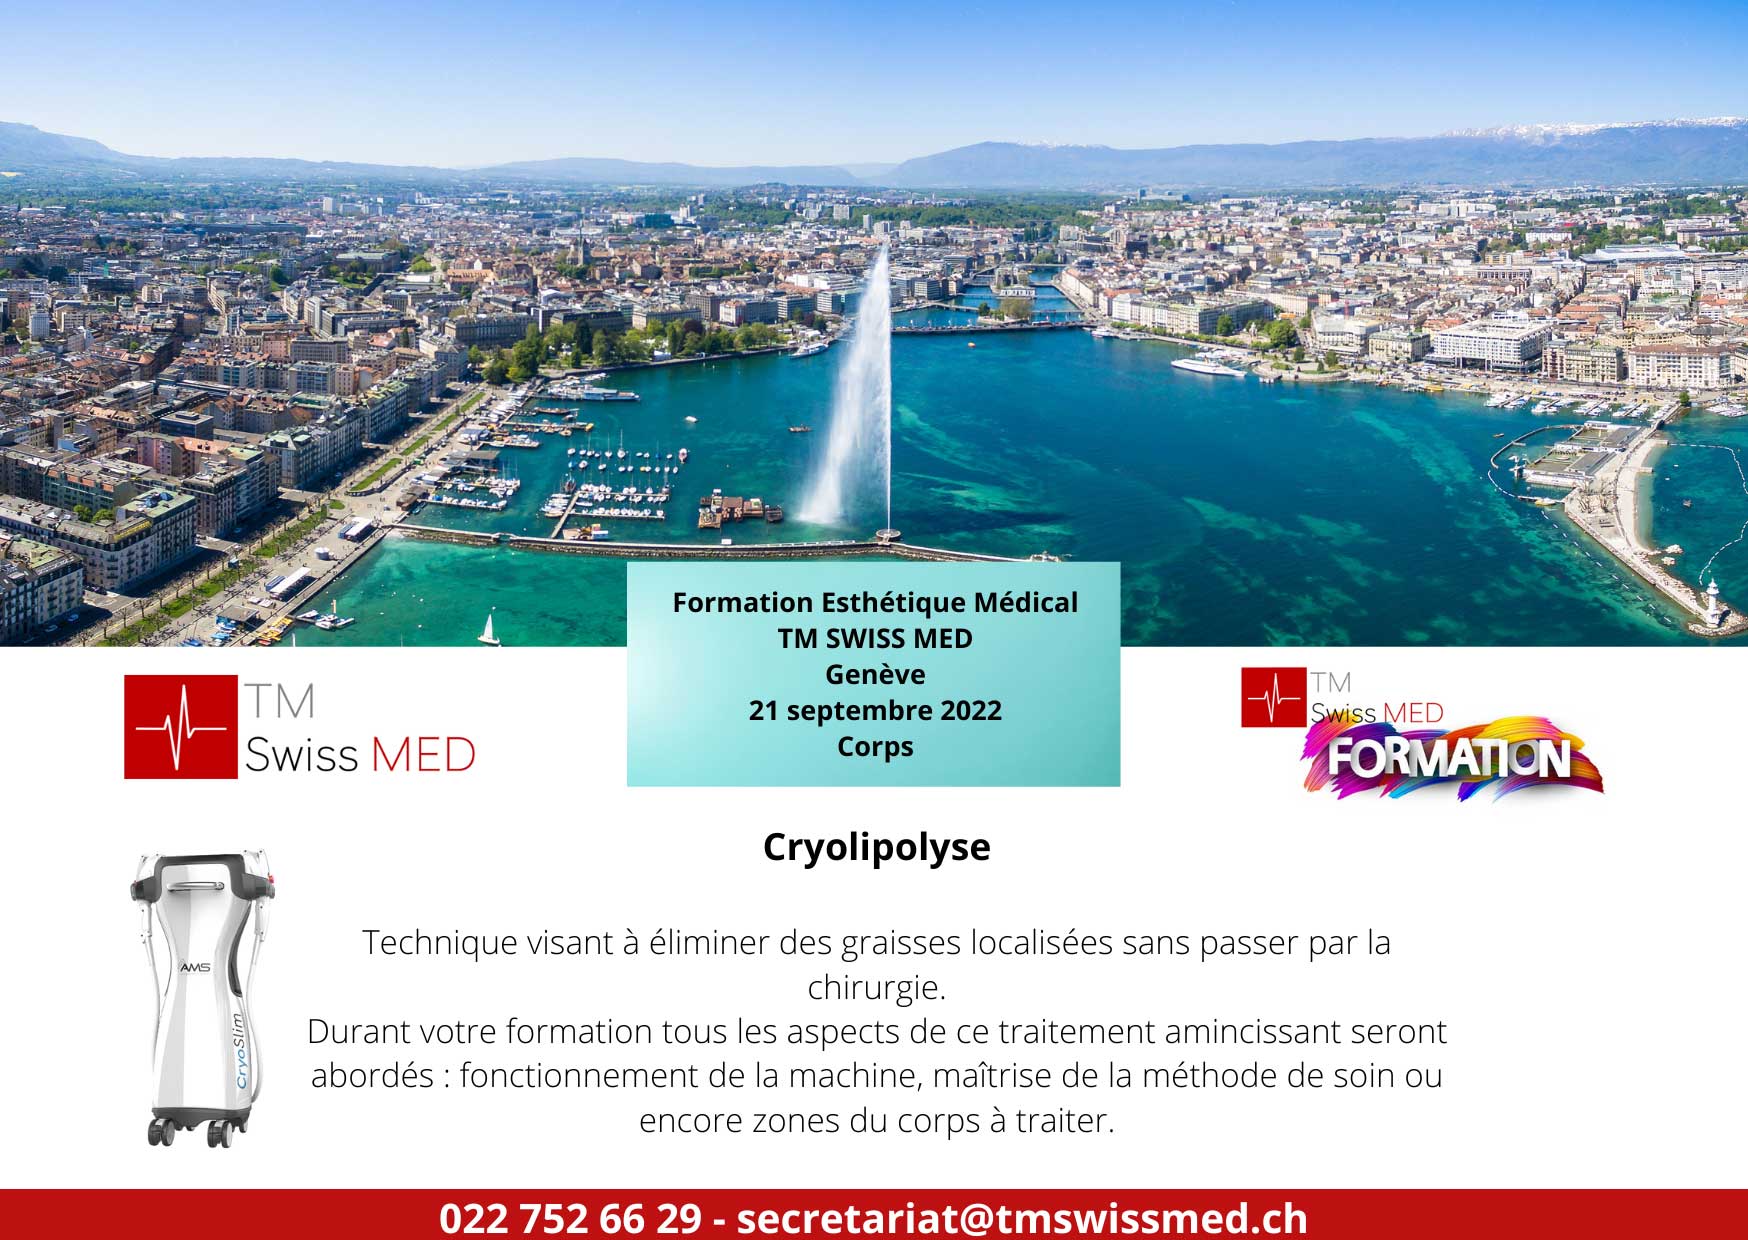 formation-tmswissmed-geneve-traitement-cryolipolyse-septembre2022